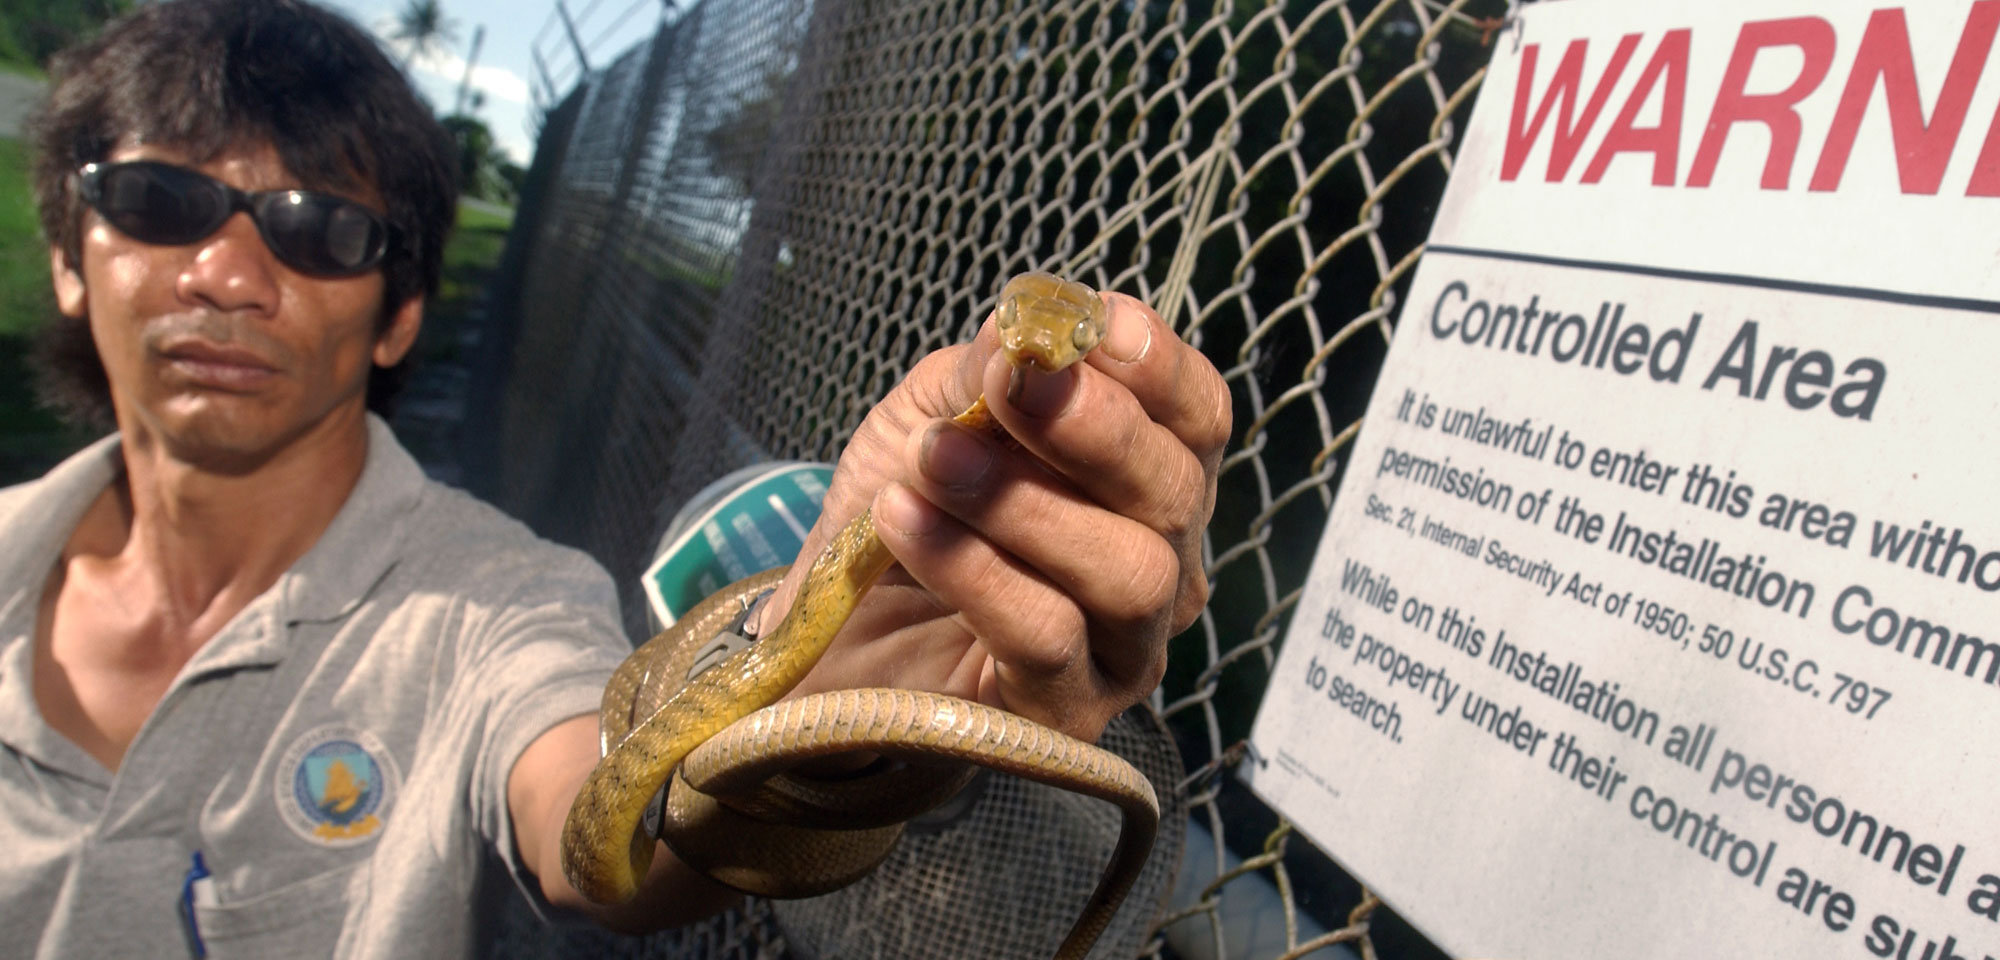 Photograph of a man wearing sunglasses and holding a brown tree snake up toward the camera. The man is standing next to a chain-link fence with a warning sign on it. The sign says: "Warning. Controlled area. It is unlawful to enter this area without permission of the Installation Commission. White on this Installation all personnel and the property under their control are subject to search."